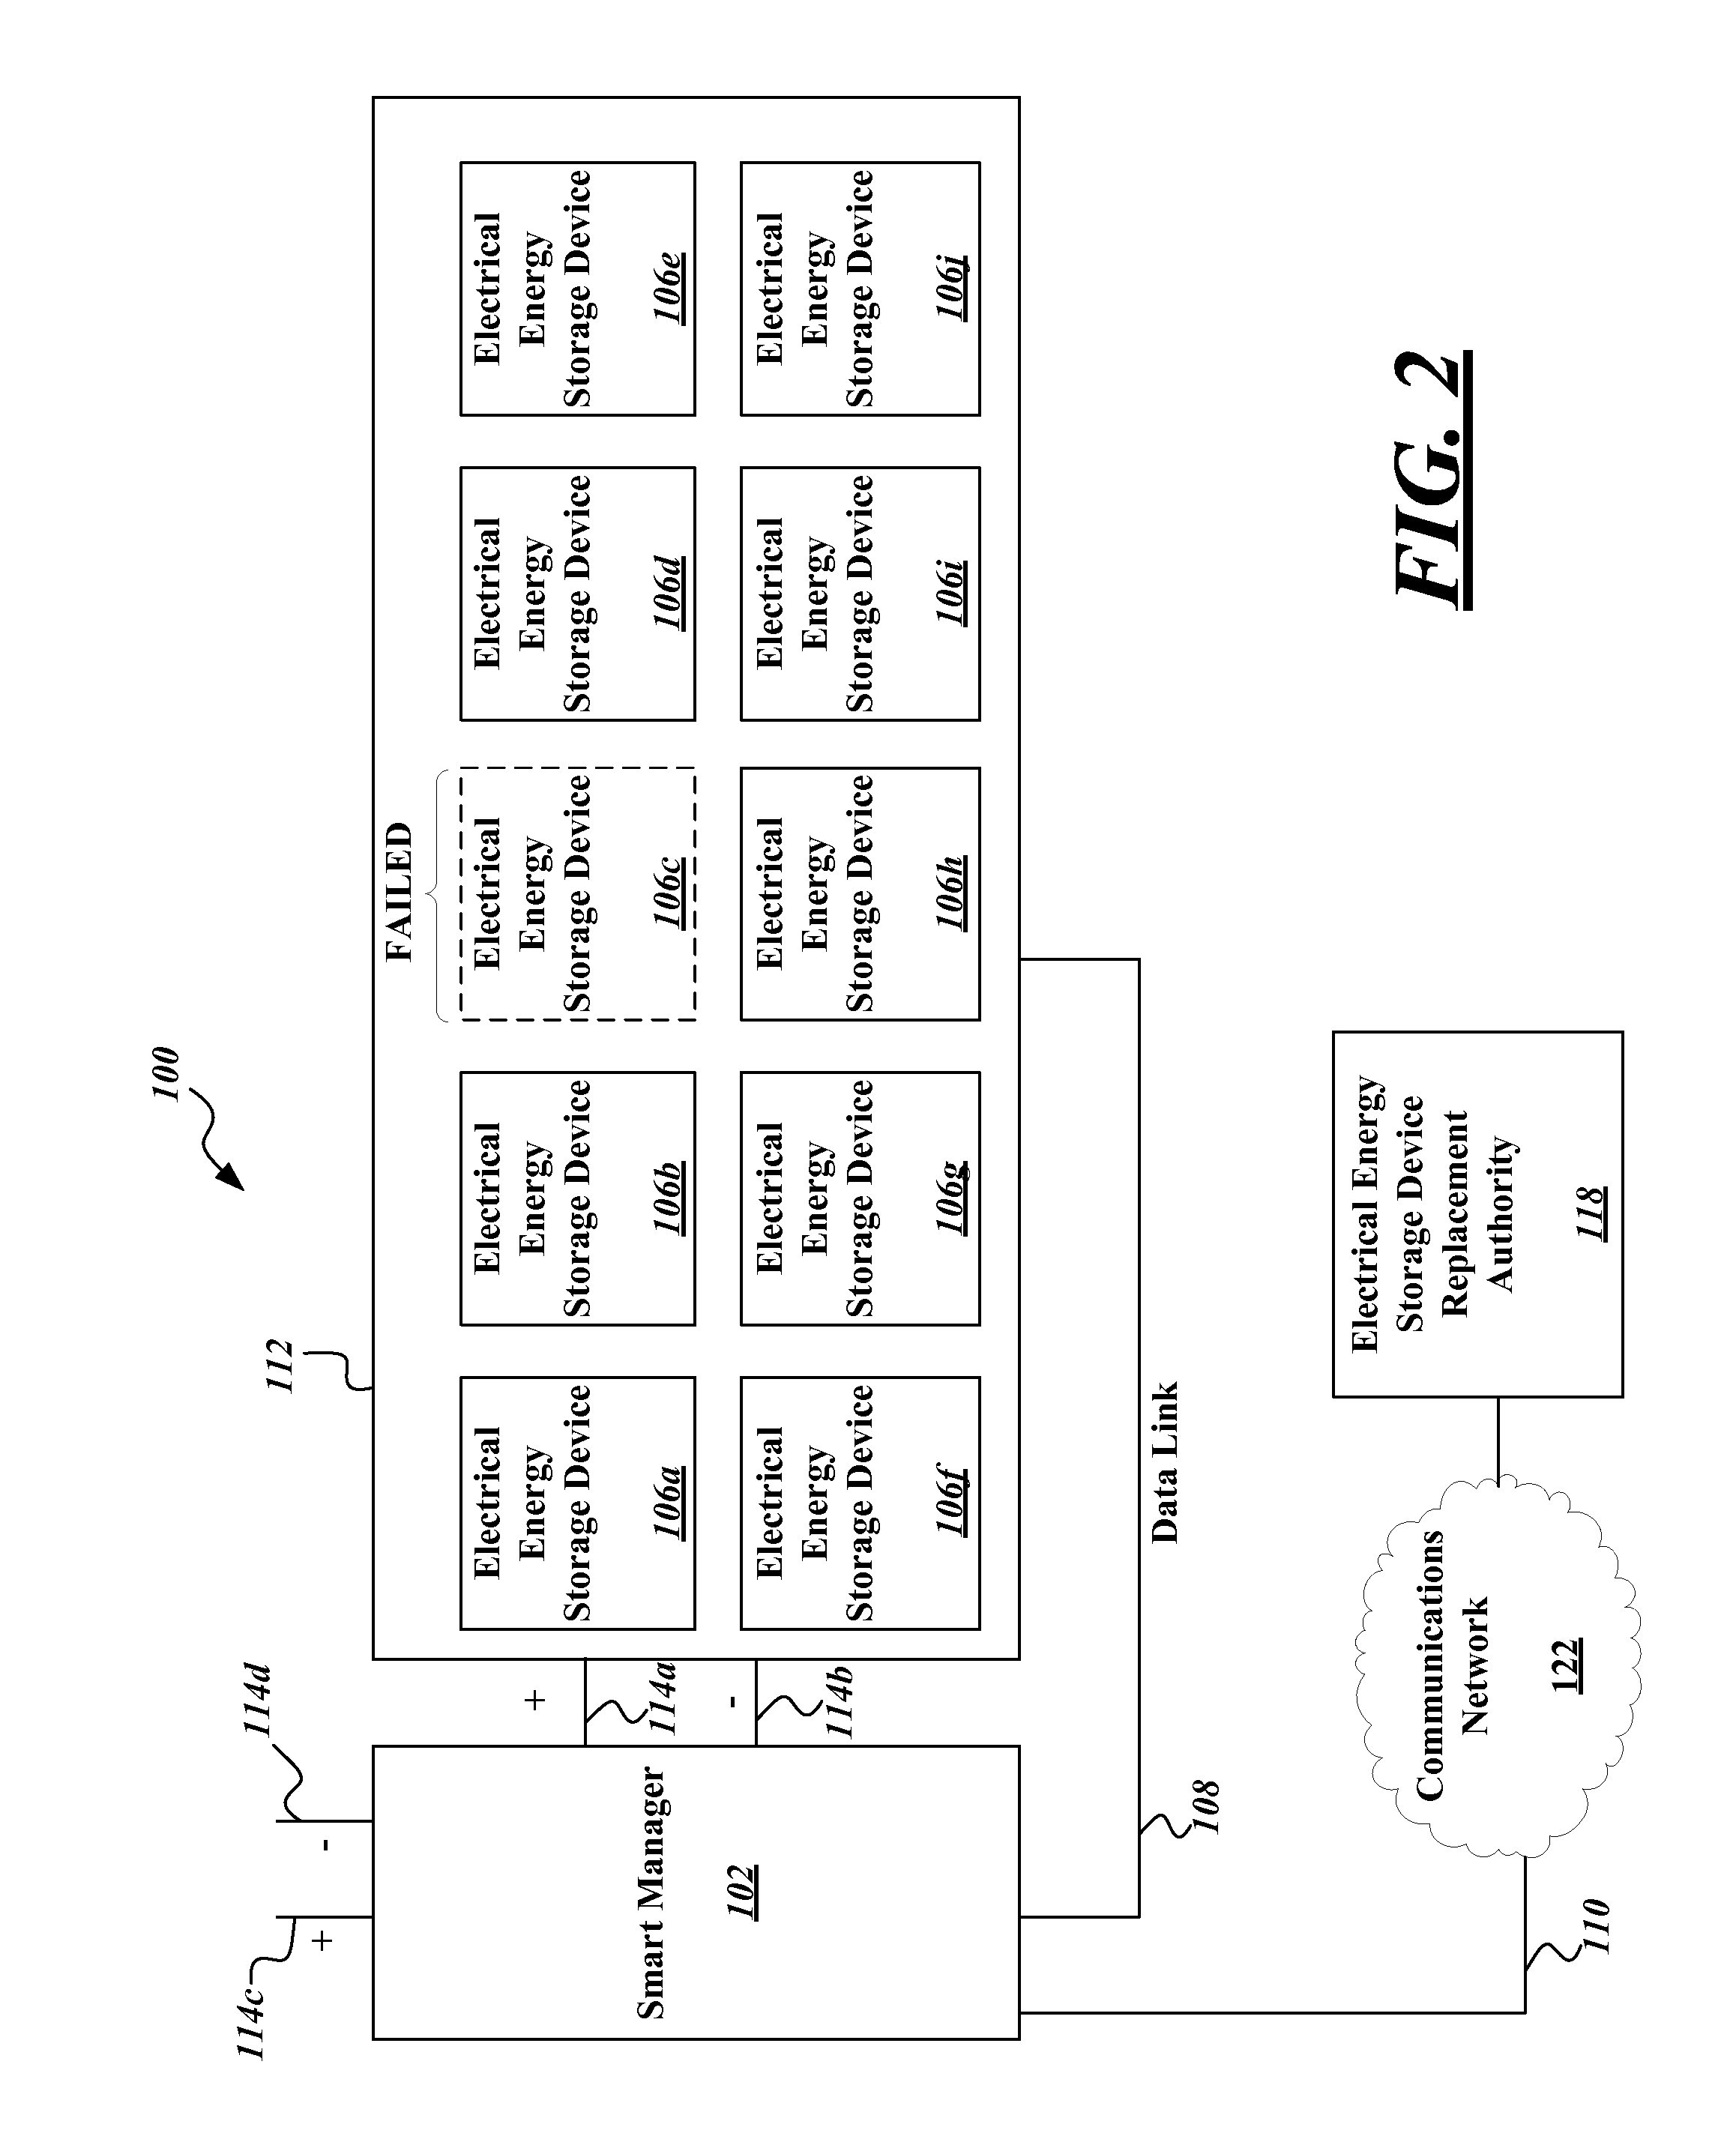 Systems and methods for utilizing an array of power storage devices, such as batteries